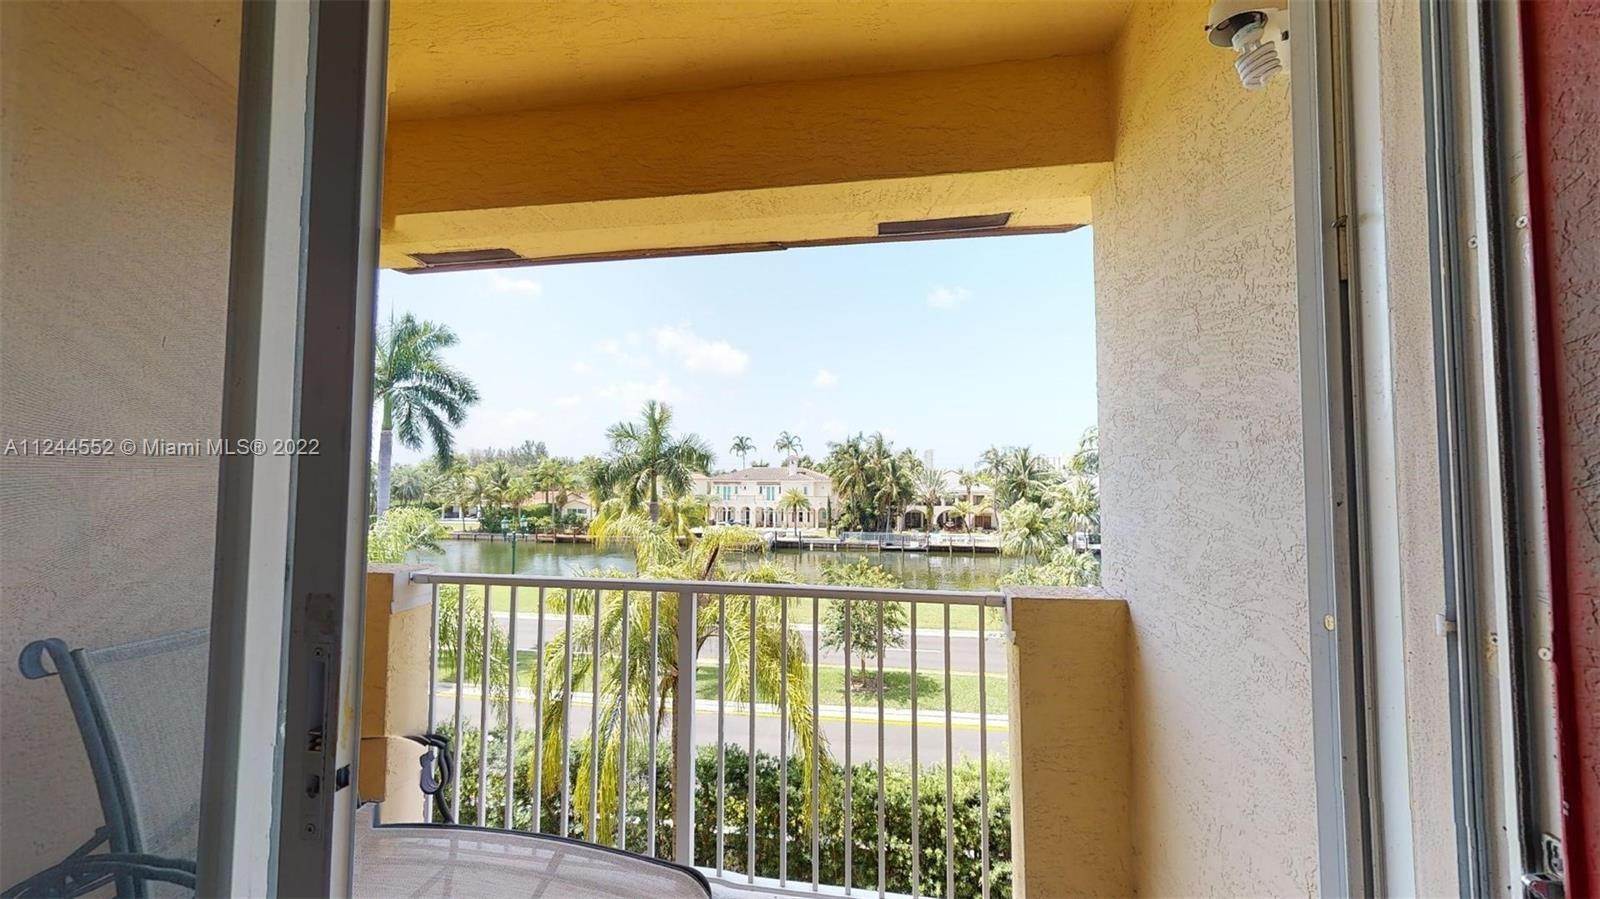 12. Townhouse for Sale at Aventura, FL 33180